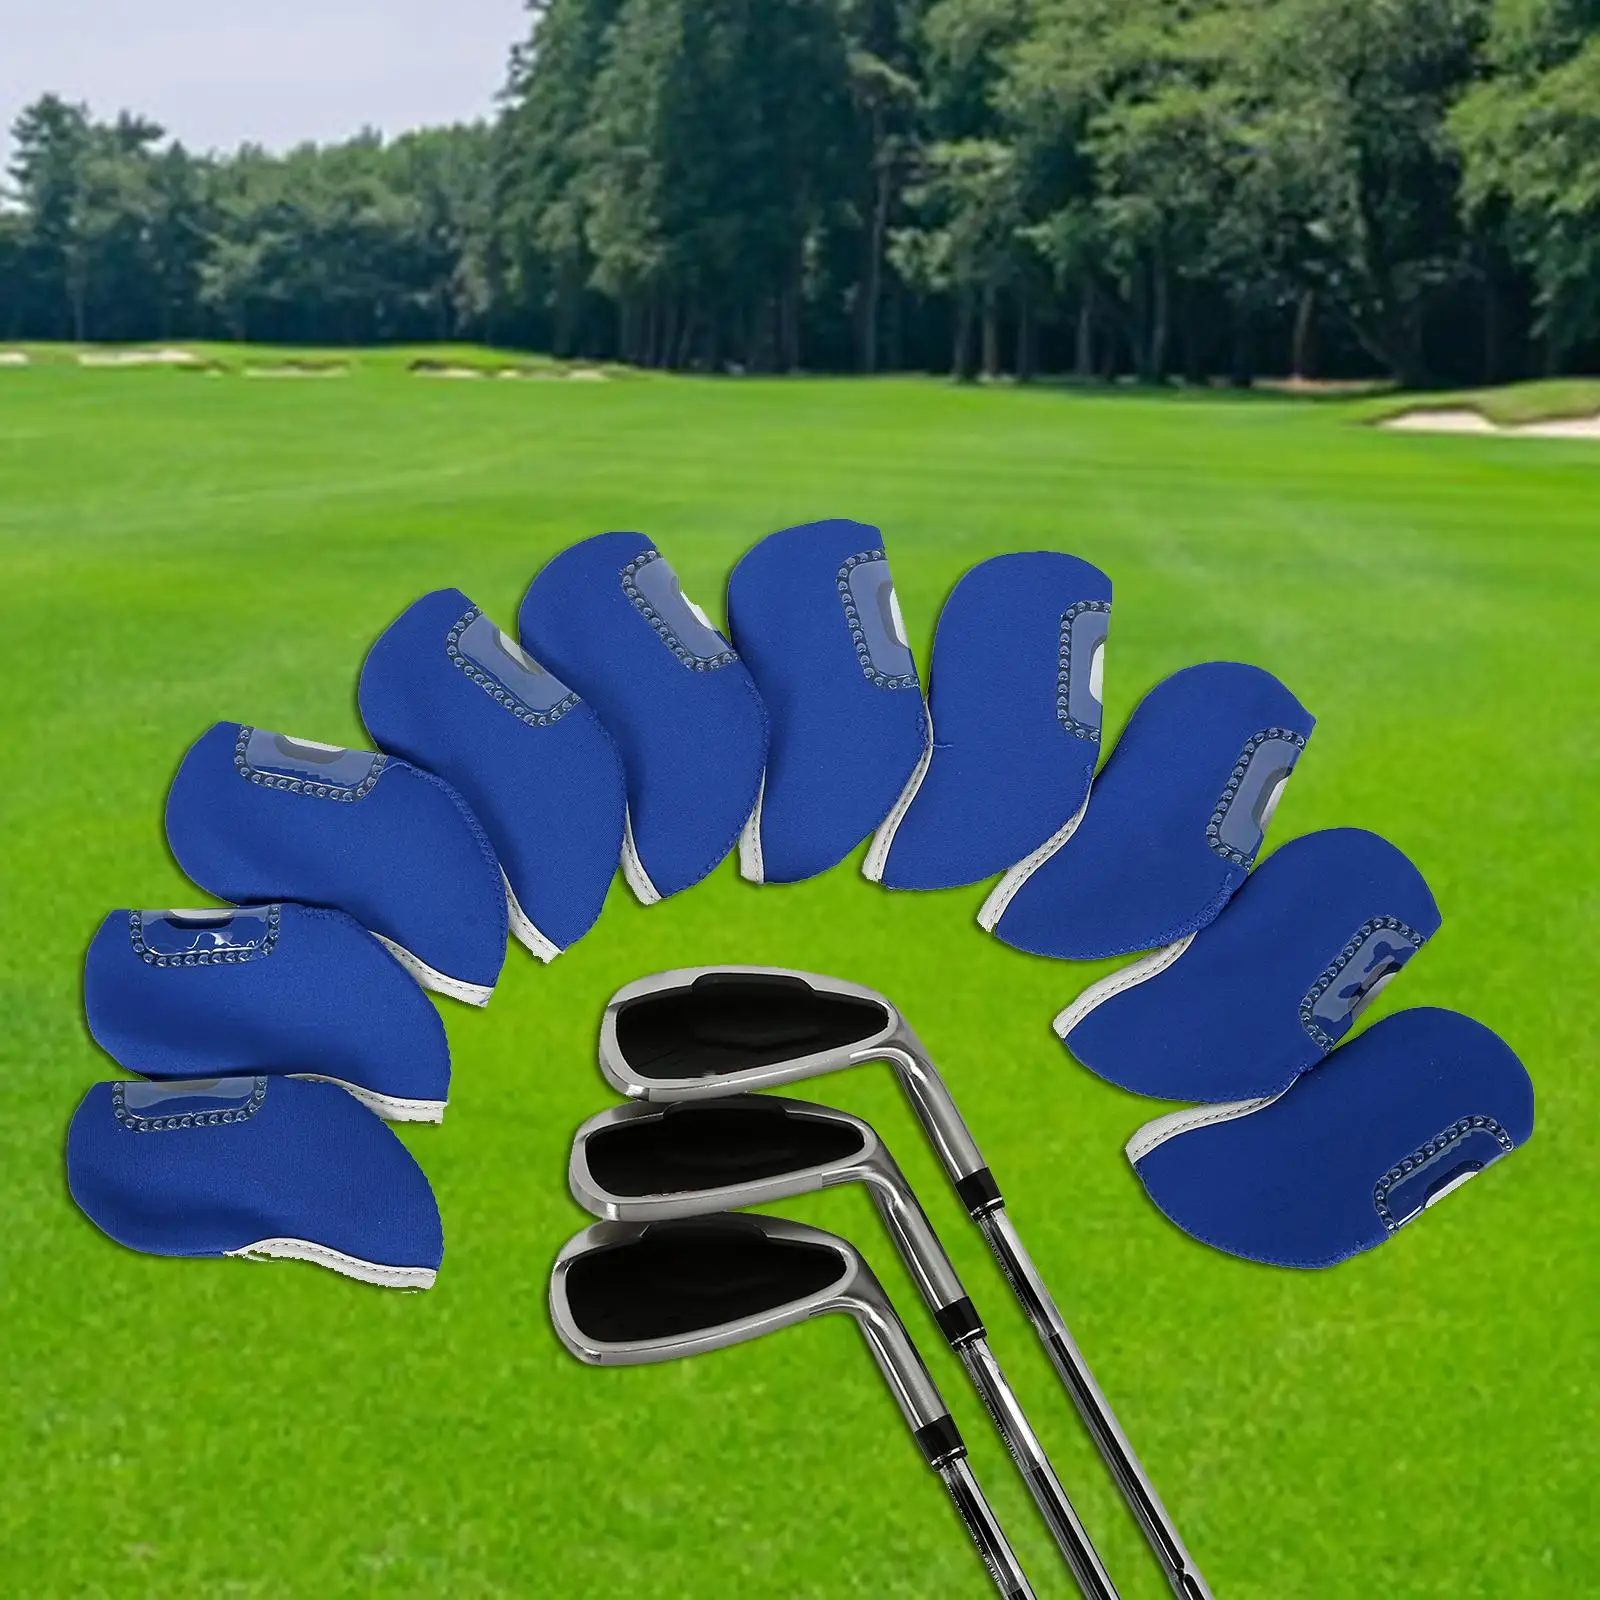 10x Golf Club Headcovers Golf Wedges Headcovers Waterproof Visible Window Golf Iron Covers Set for Most Irons Head Women Men